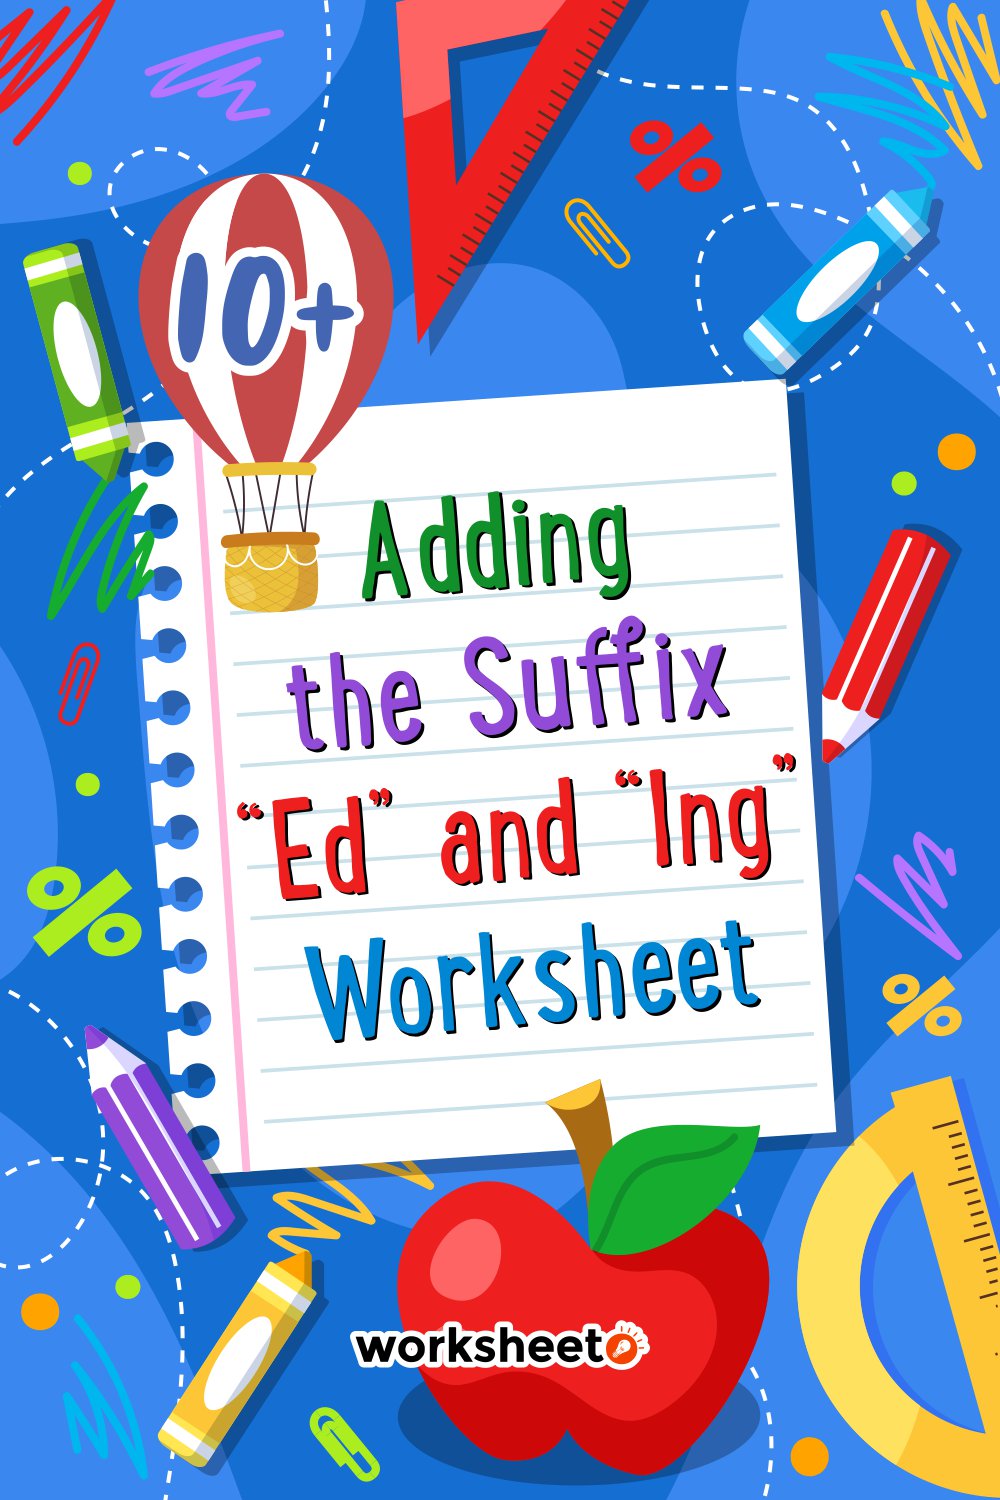 20 Images of Adding The Suffix Ed And ING Worksheet